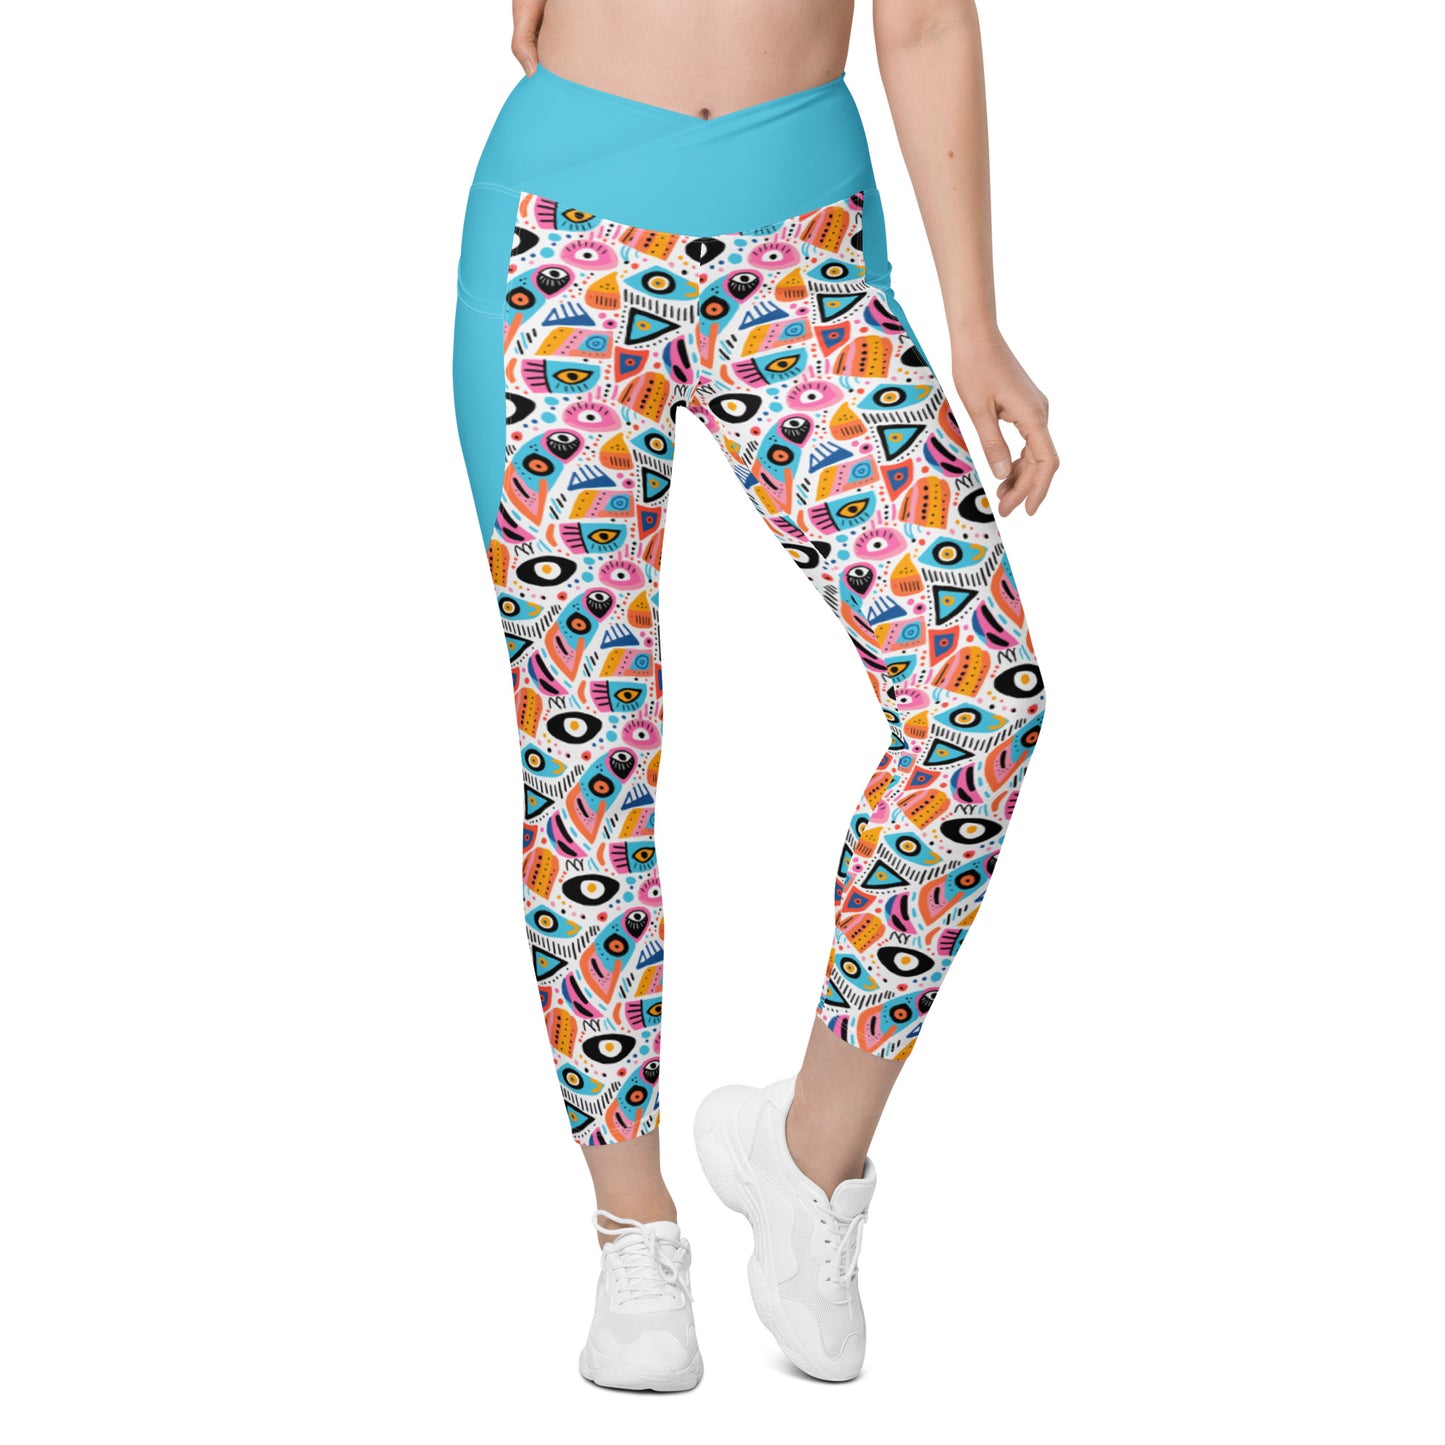 Malocchio Crossover Waist 7/8 Recycled Yoga Leggings / Yoga Pants with Pockets